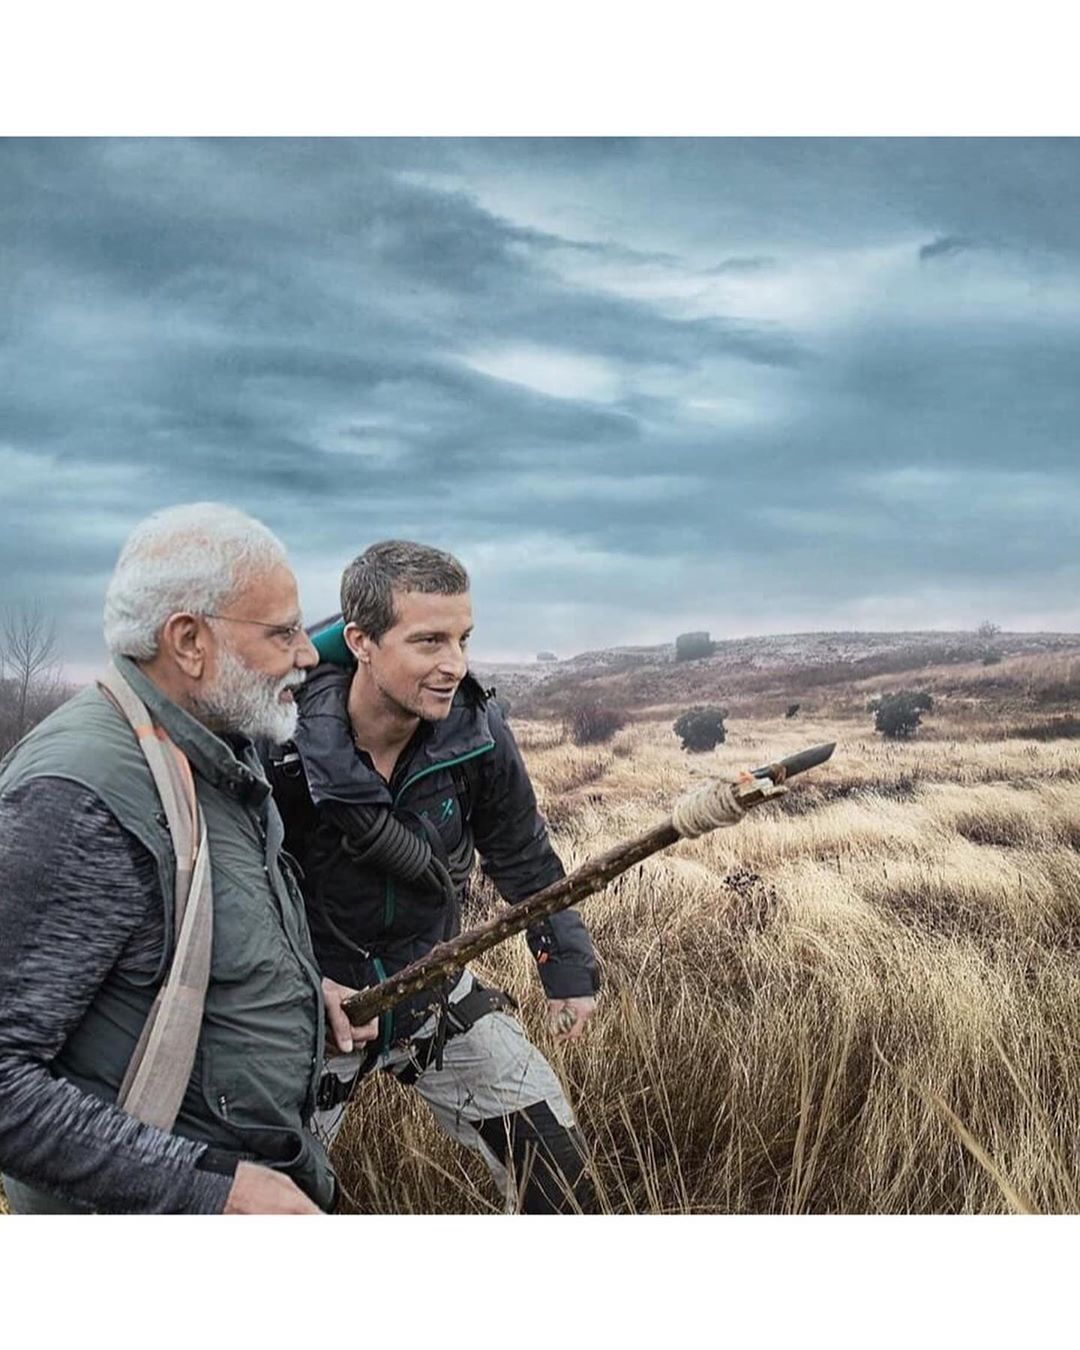 PM Narendra Modi To Star In An Episode Of "Man Vs Wild" To Create Awareness About Animal Conservation